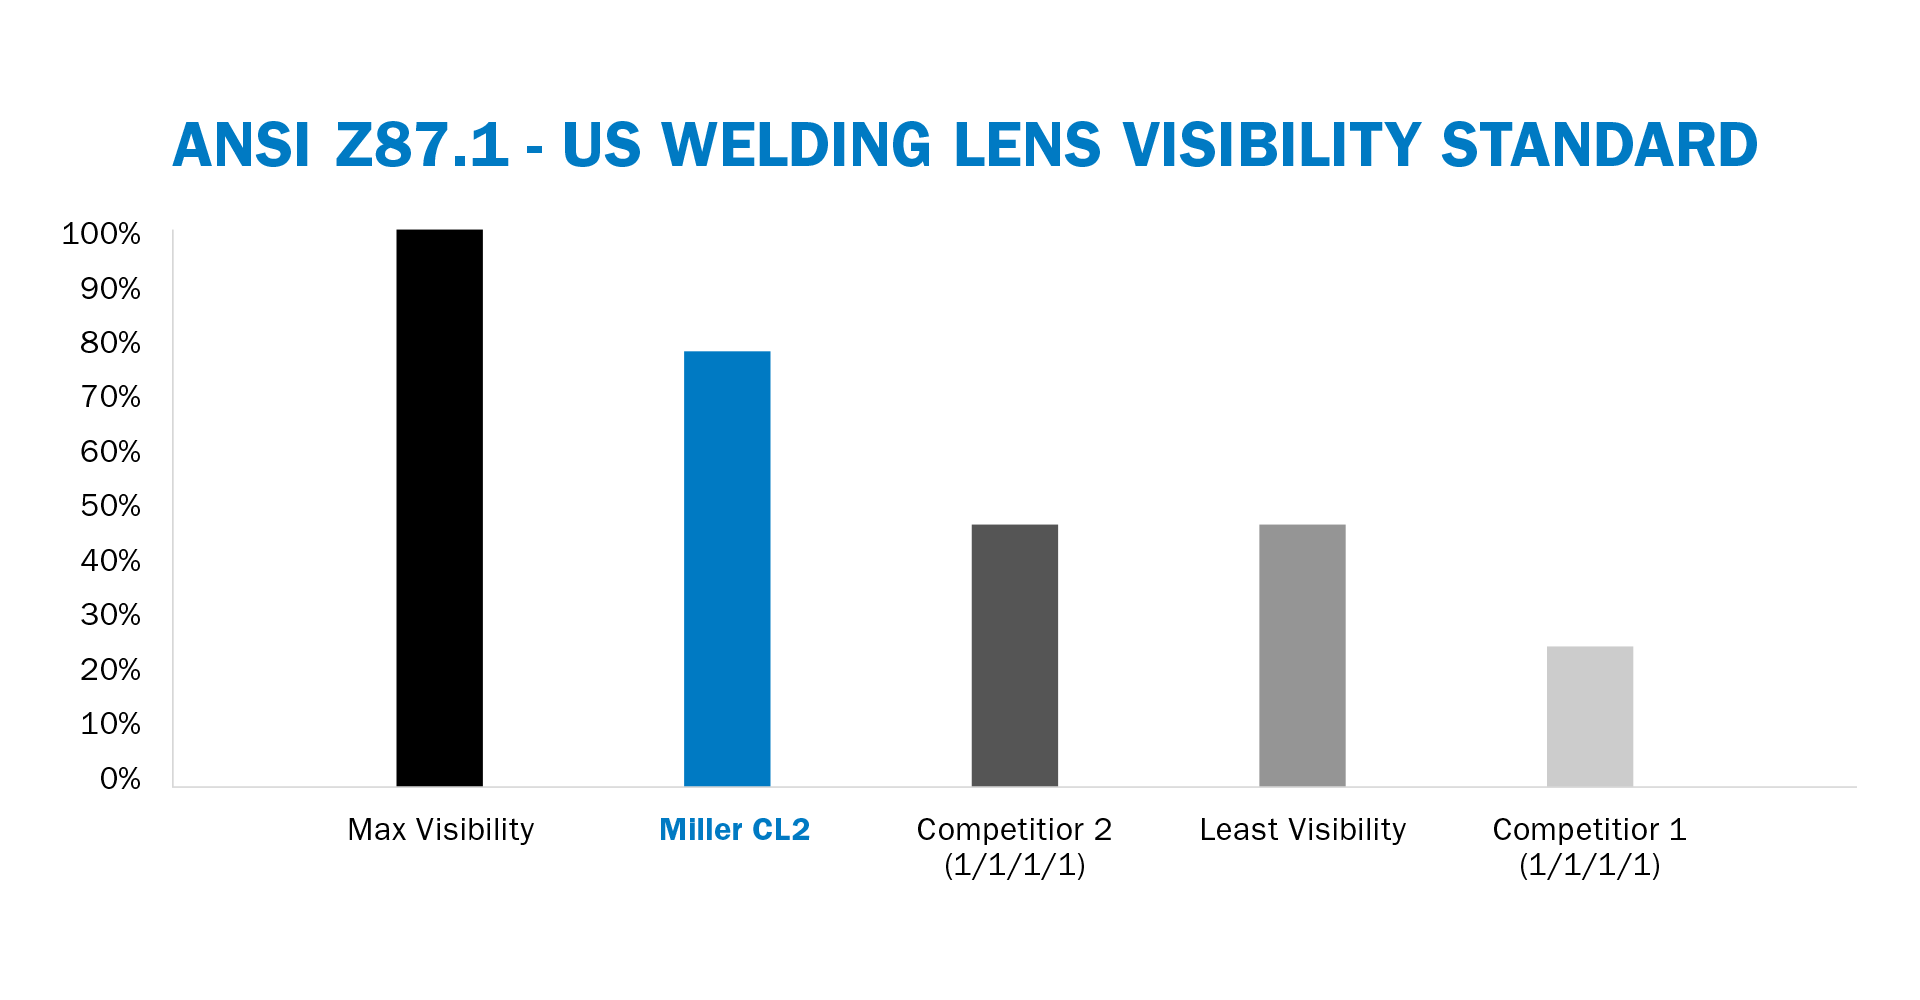 Welding helmet visibility standards compared